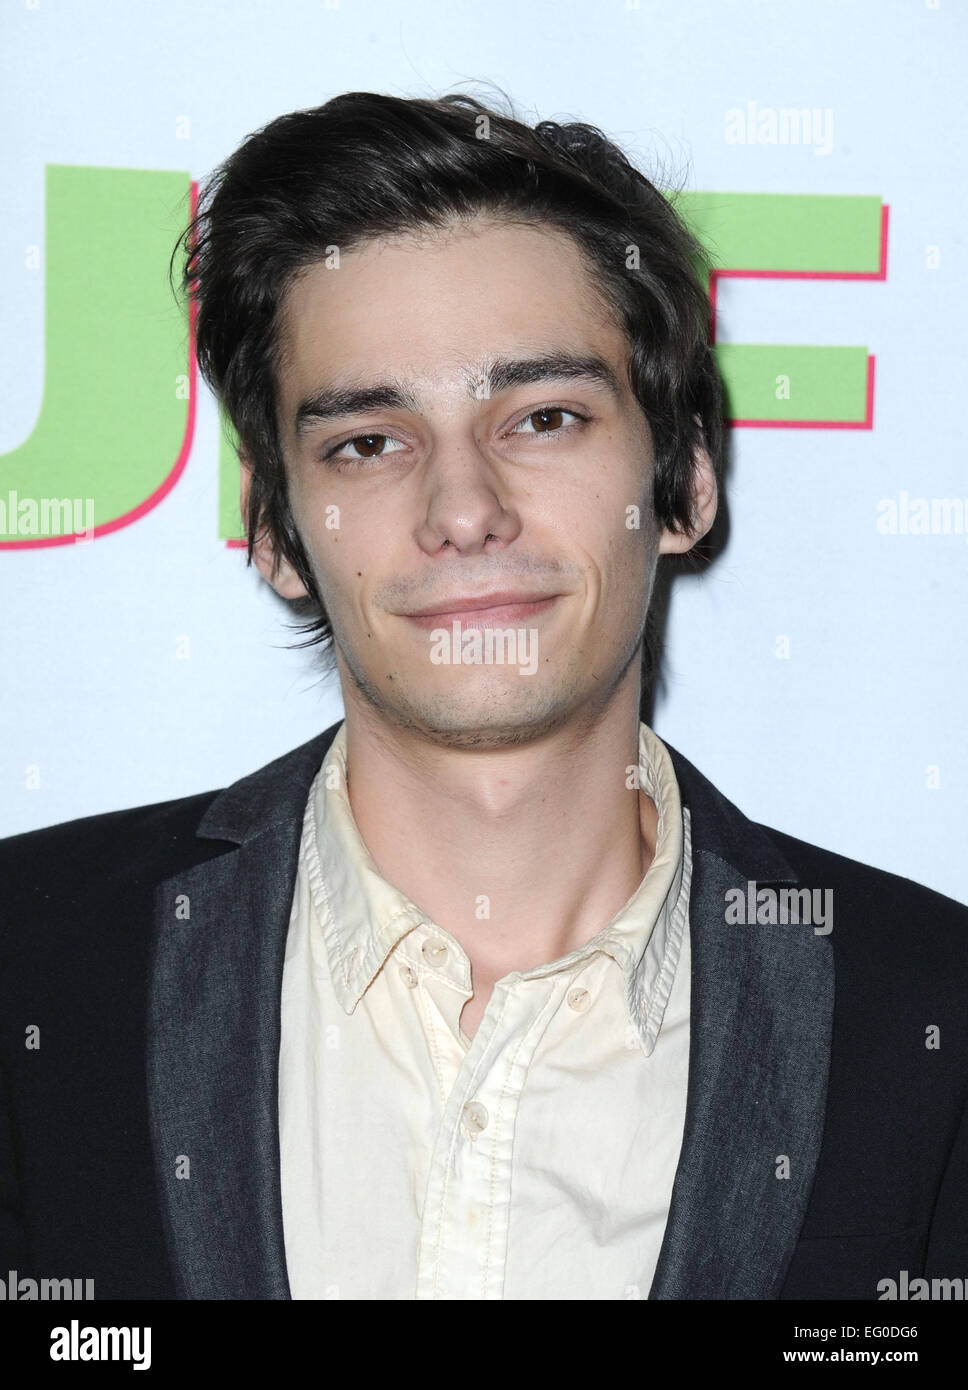 Los Angeles, California, USA. 12th Feb, 2015. Devin Bostick attending the Los Angeles Screening of ''The Duff'' held at the TCL Chinese 6 Theatres in Hollywood, California on February 12, 2015. 2015 Credit:  D. Long/Globe Photos/ZUMA Wire/Alamy Live News Stock Photo